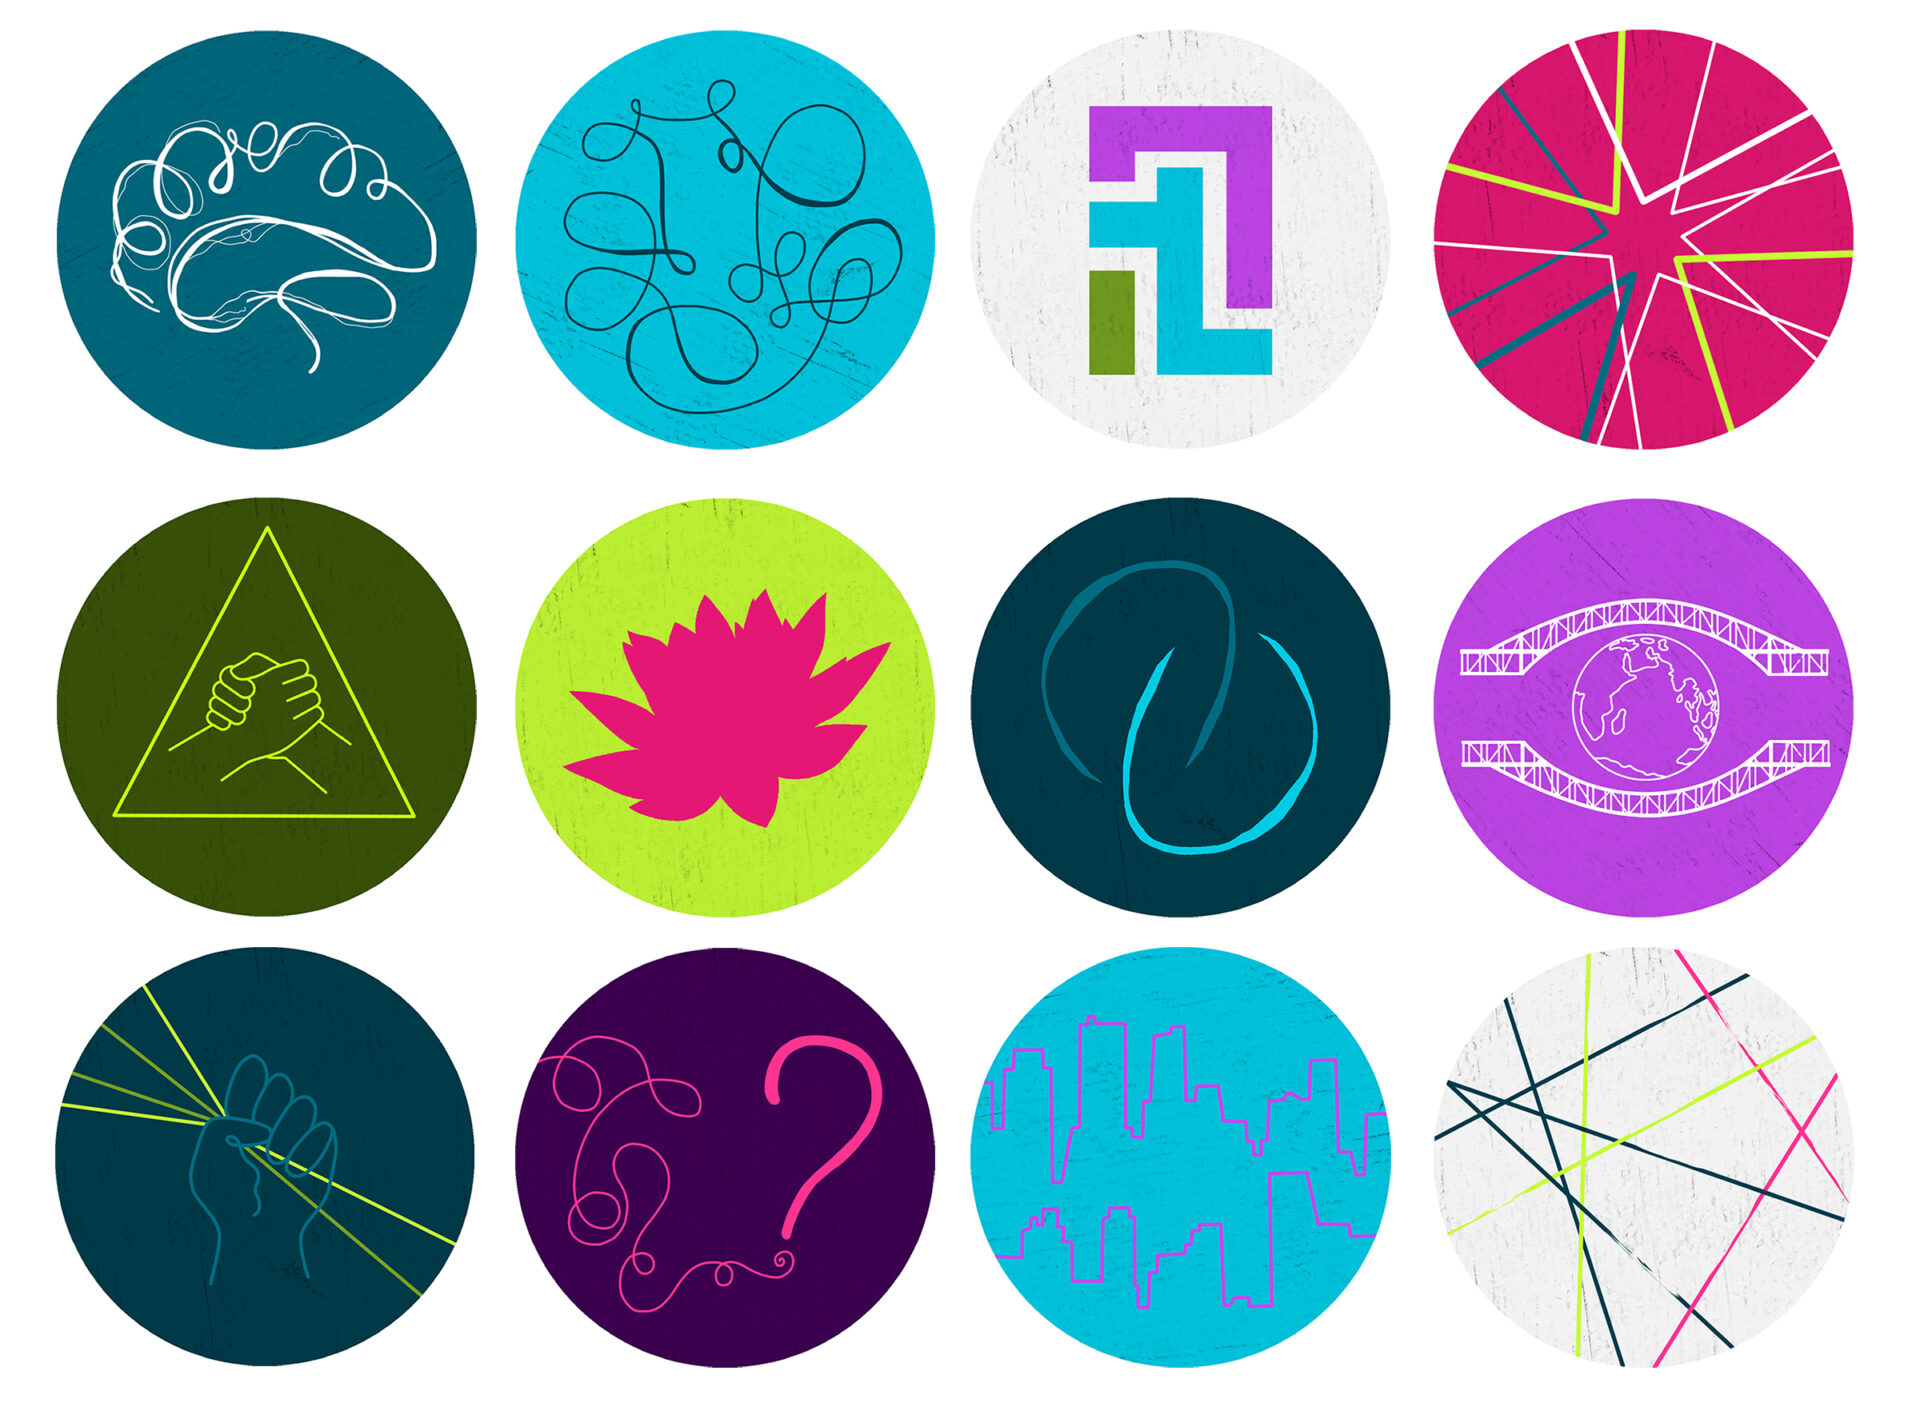 12 colourful icons created for McPin's 10 for 10 resources